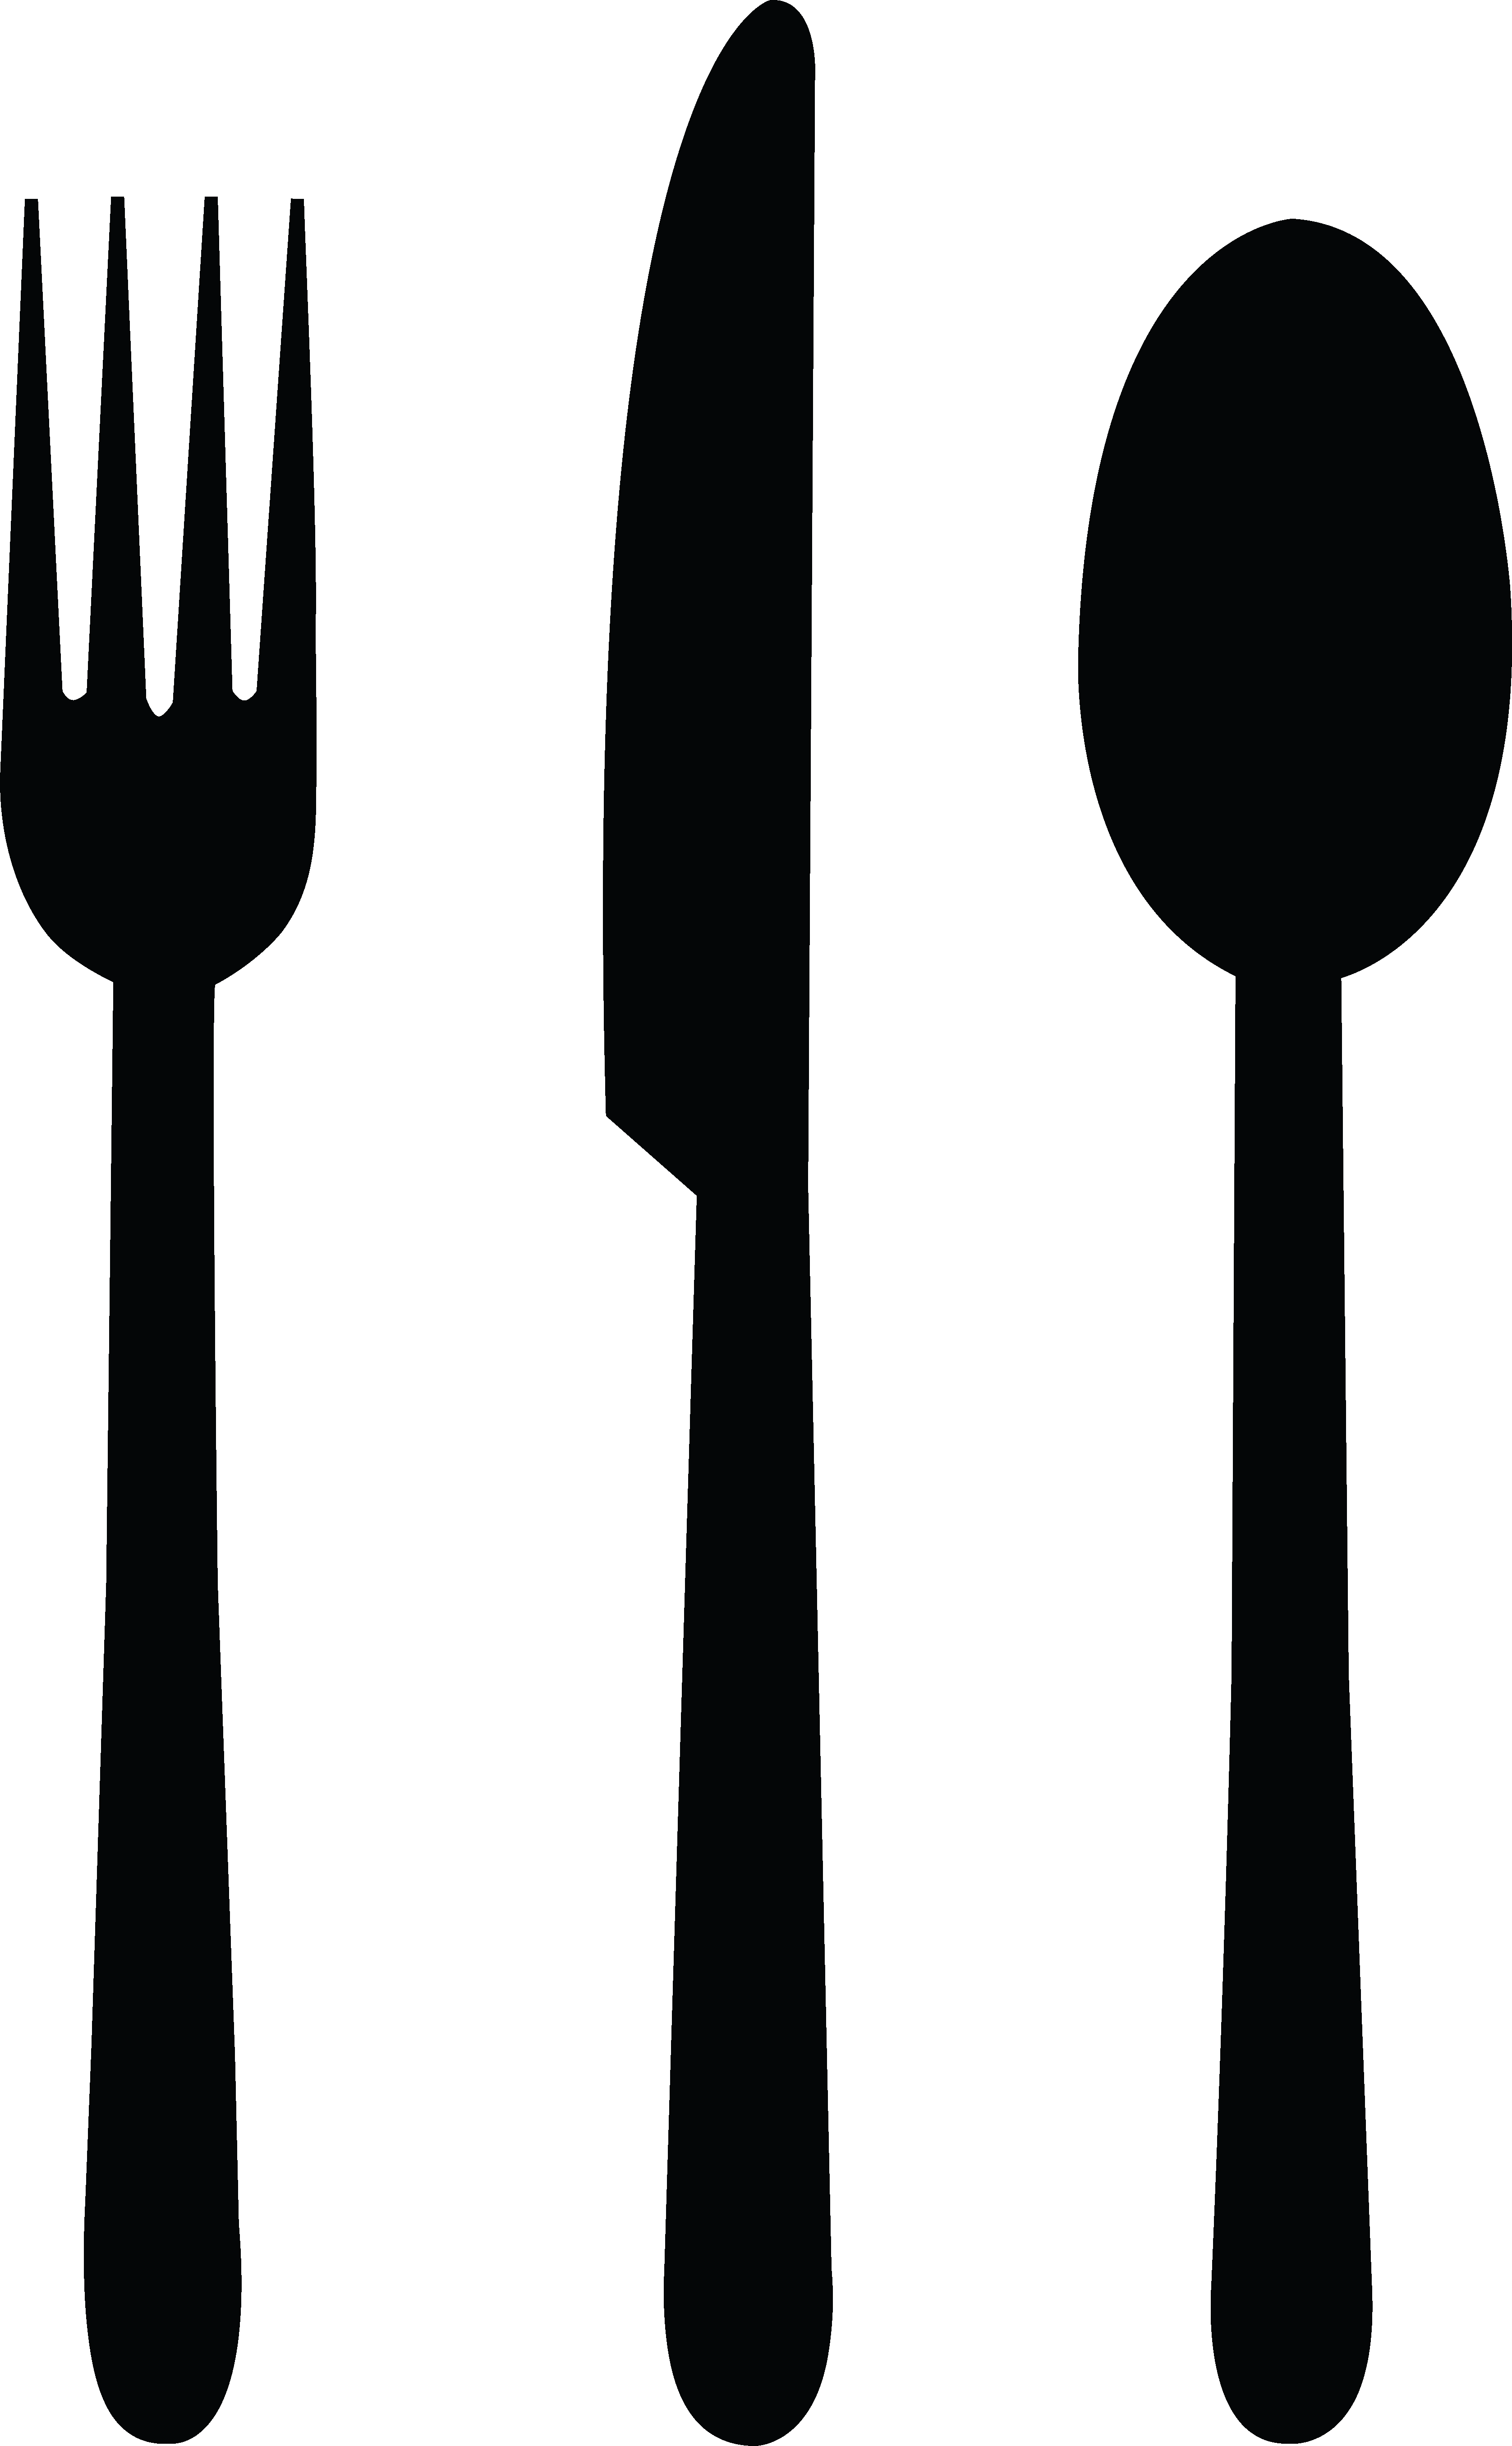 Spoon-and-fork icons | Noun Project